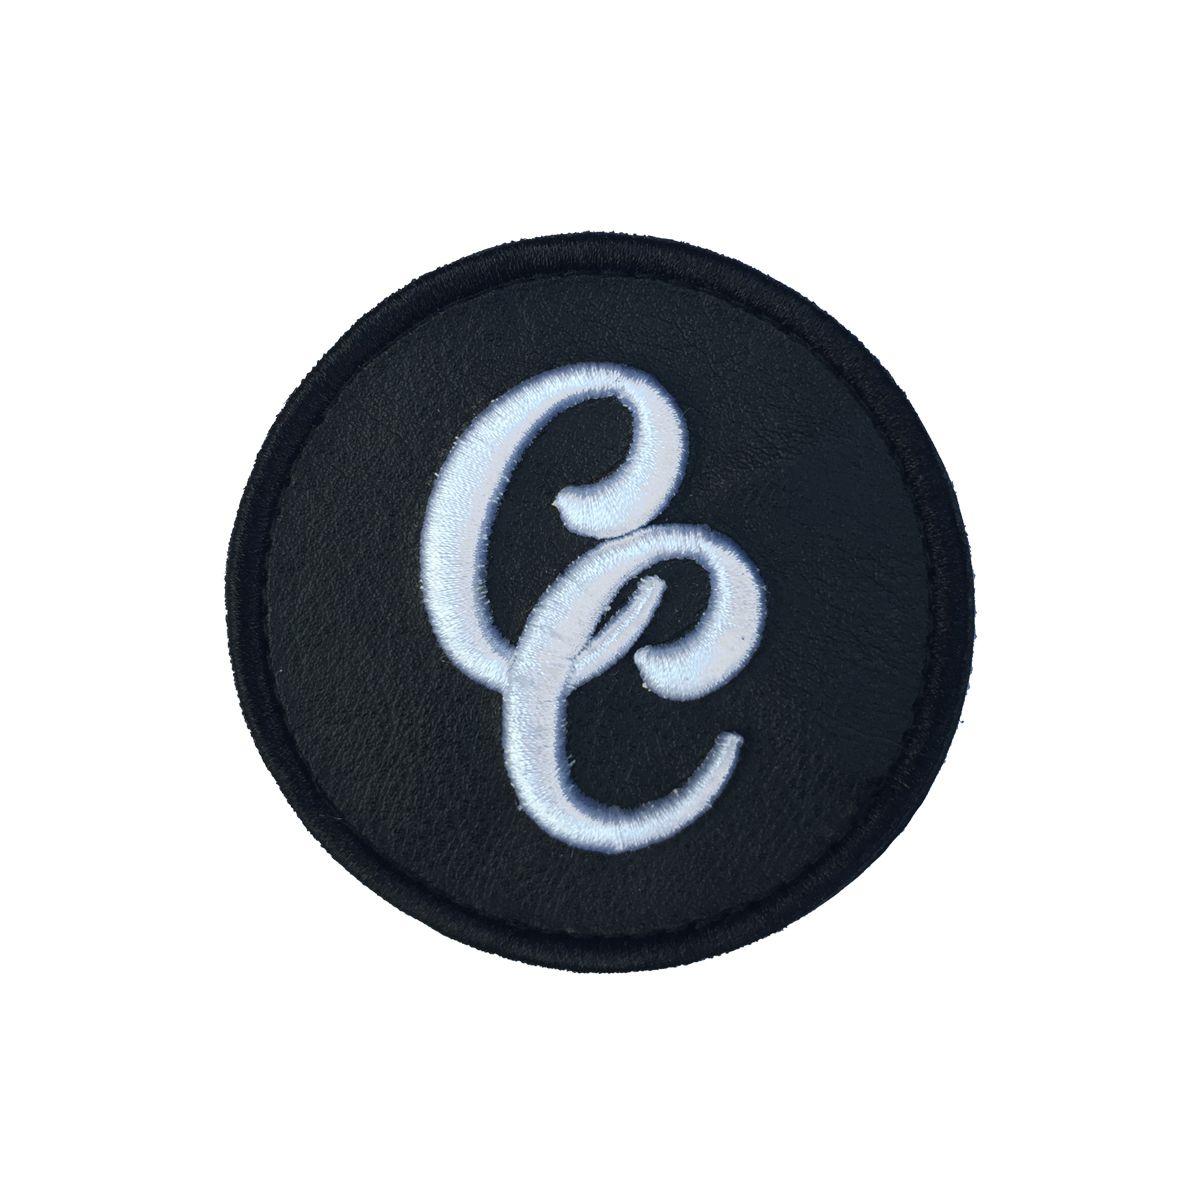 CC Logo - CC Logo Velcro Patch in Black Faux Leather by Custom Crowns™